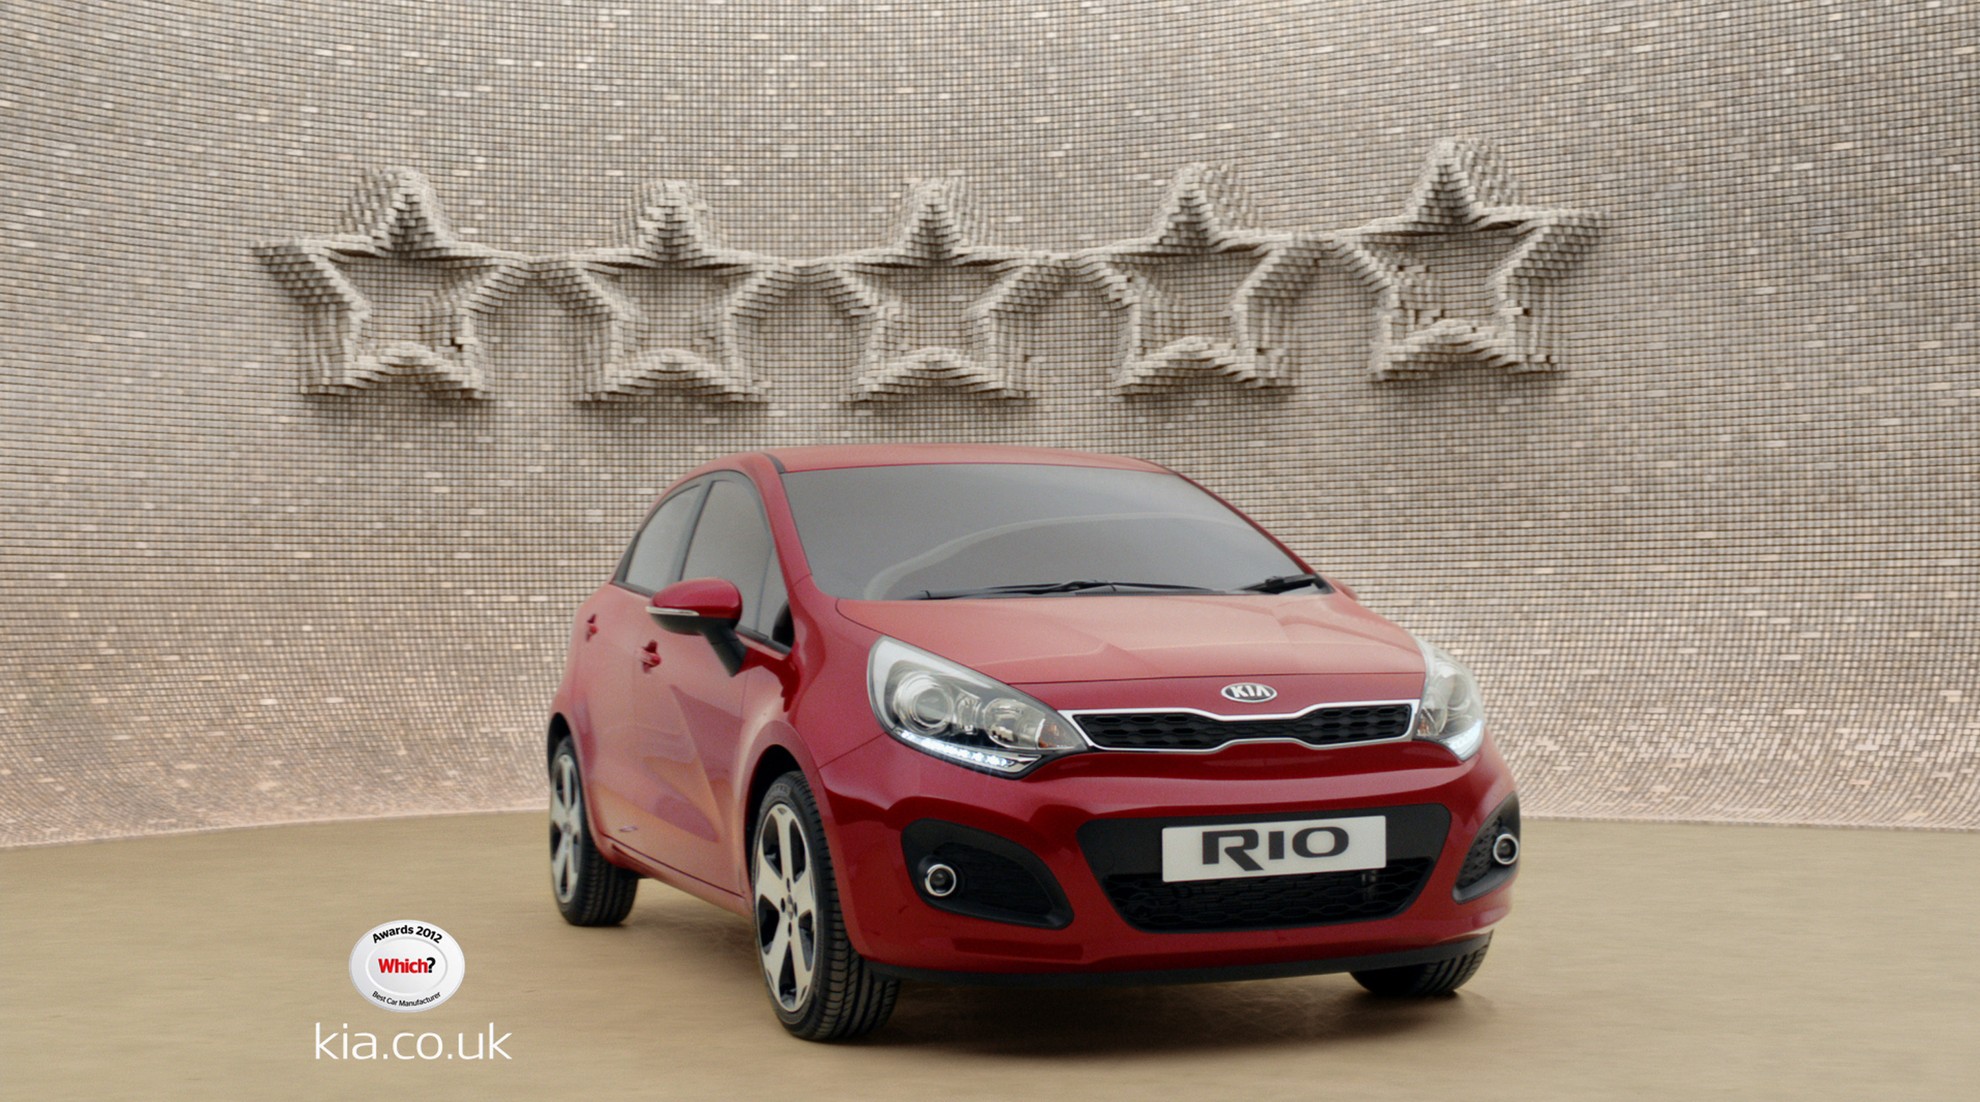 Kia starts 2013 with a focus on customer reviews